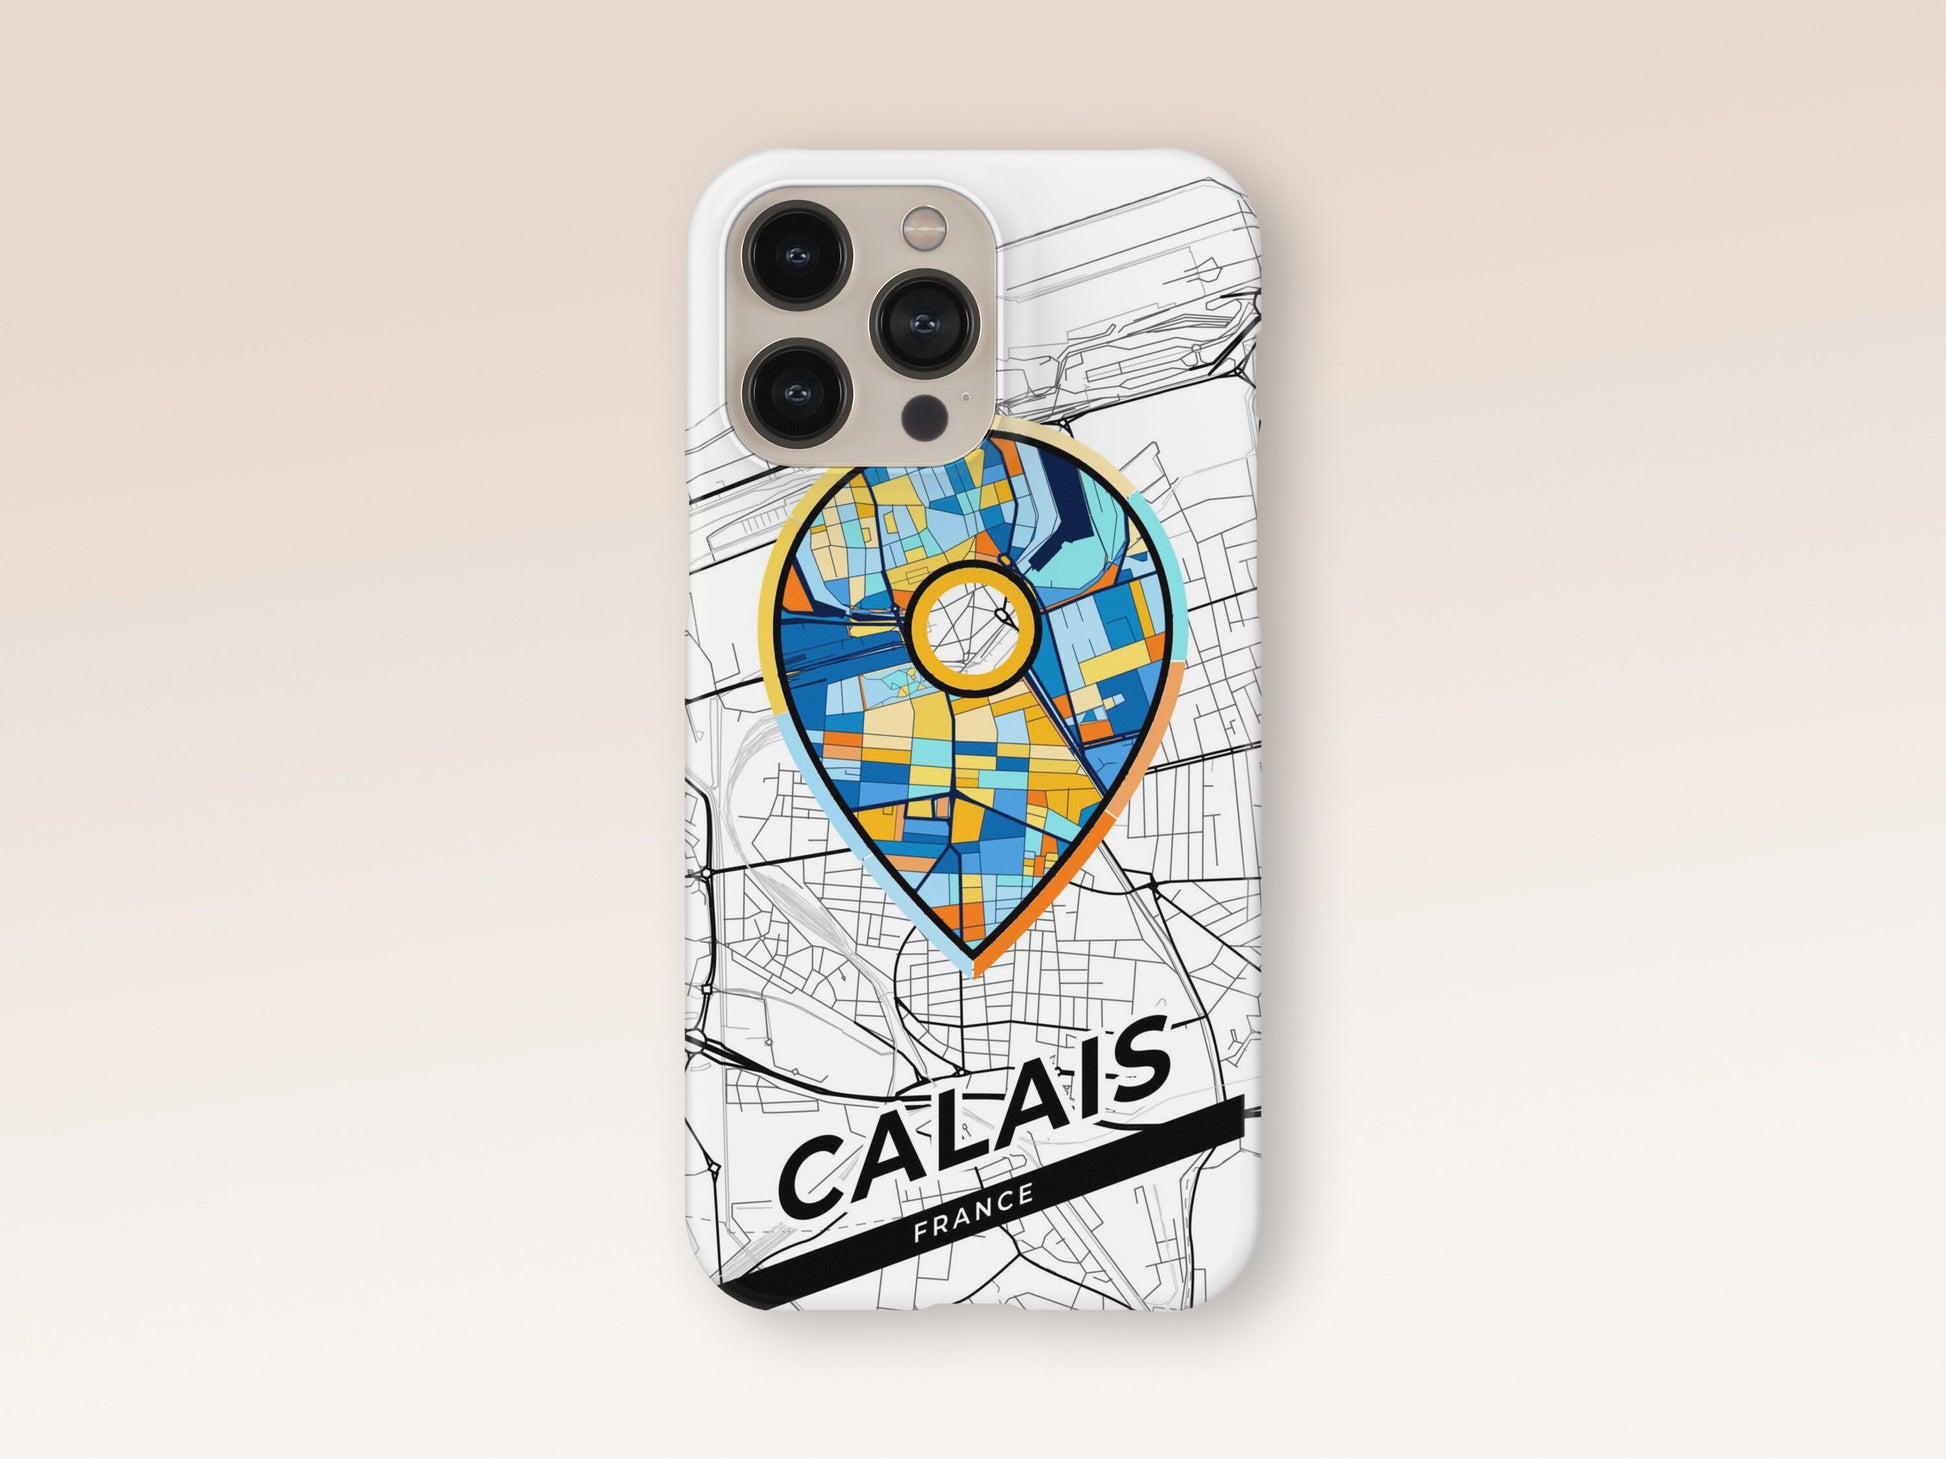 Calais France slim phone case with colorful icon. Birthday, wedding or housewarming gift. Couple match cases. 1